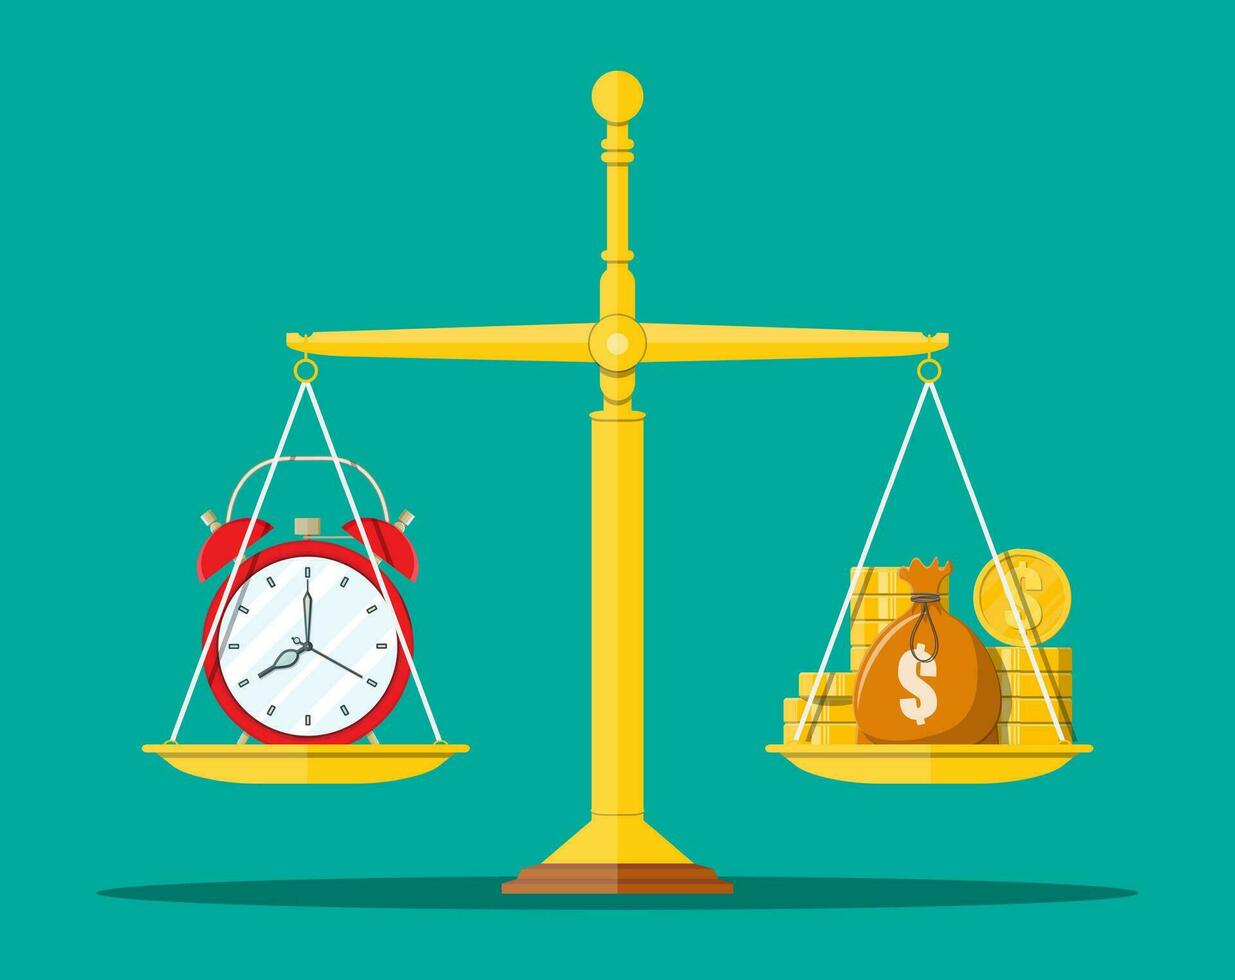 Clock and golden coins on scales. Annual revenue, financial investment, savings, bank deposit, future income, money benefit. Time is money concept. Vector illustration in flat style